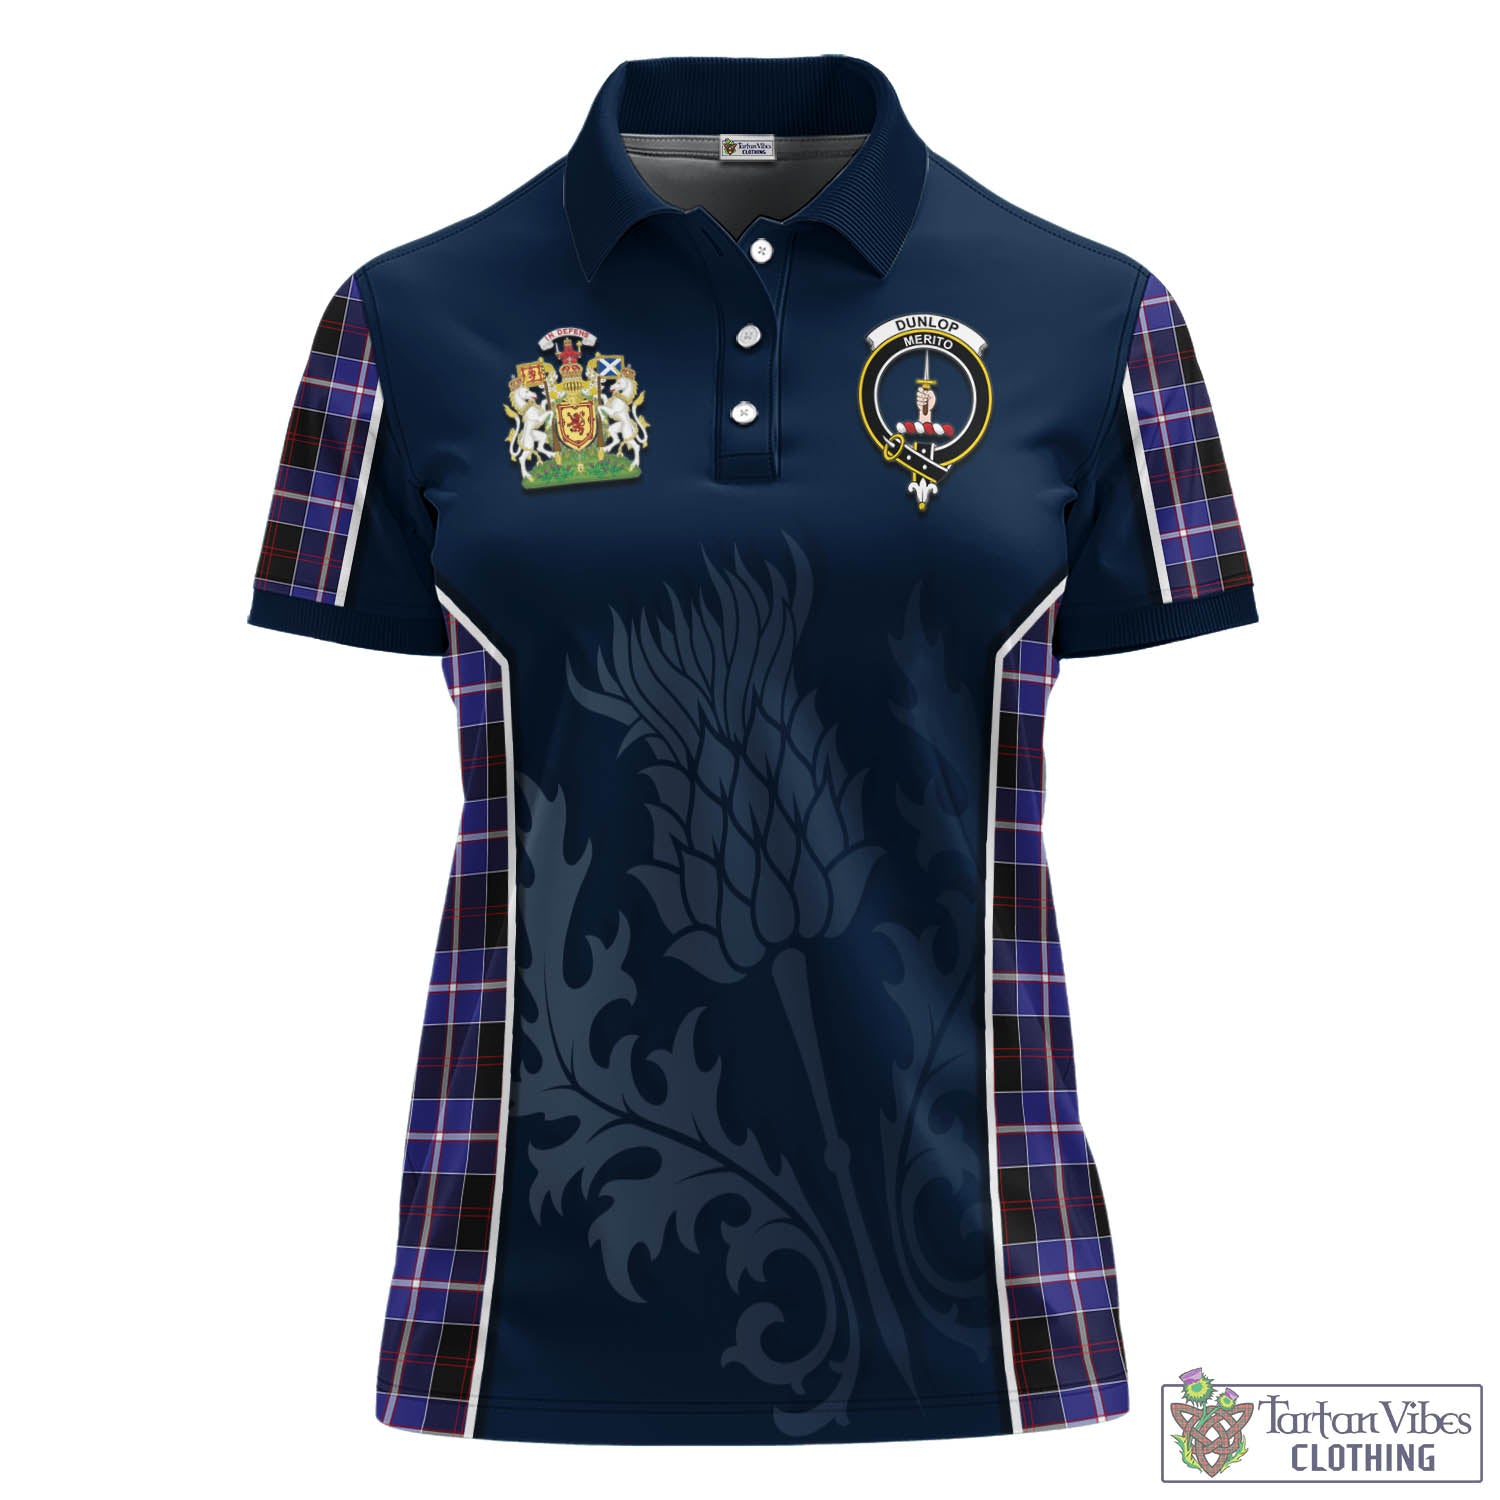 Tartan Vibes Clothing Dunlop Modern Tartan Women's Polo Shirt with Family Crest and Scottish Thistle Vibes Sport Style